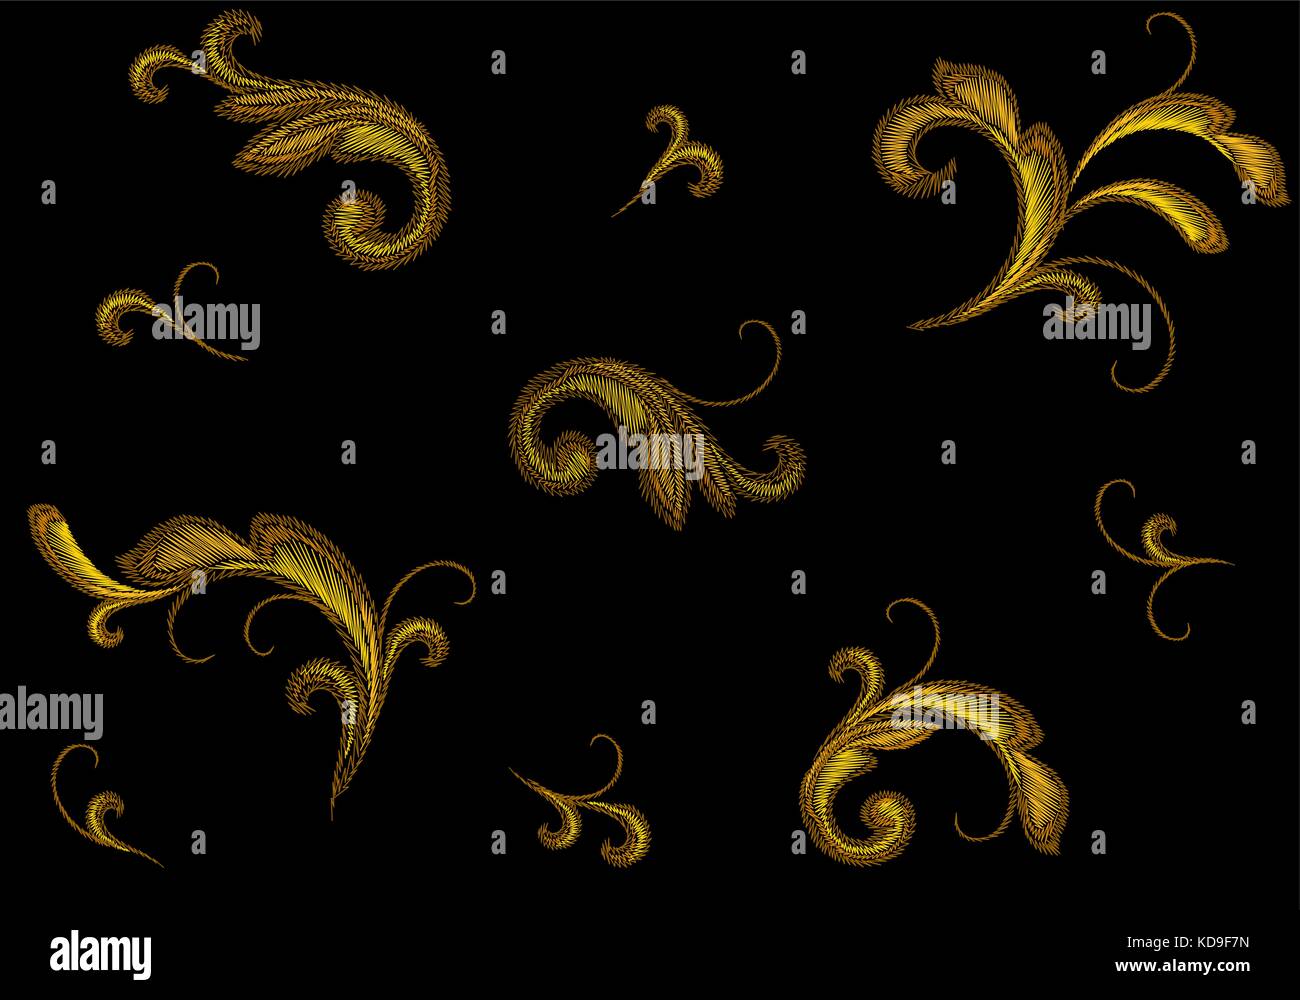 Golden Victorian Embroidery Floral Ornament. Stitch texture fashion print seamless pattern gold flower Baroque design element vector illustration art Stock Vector